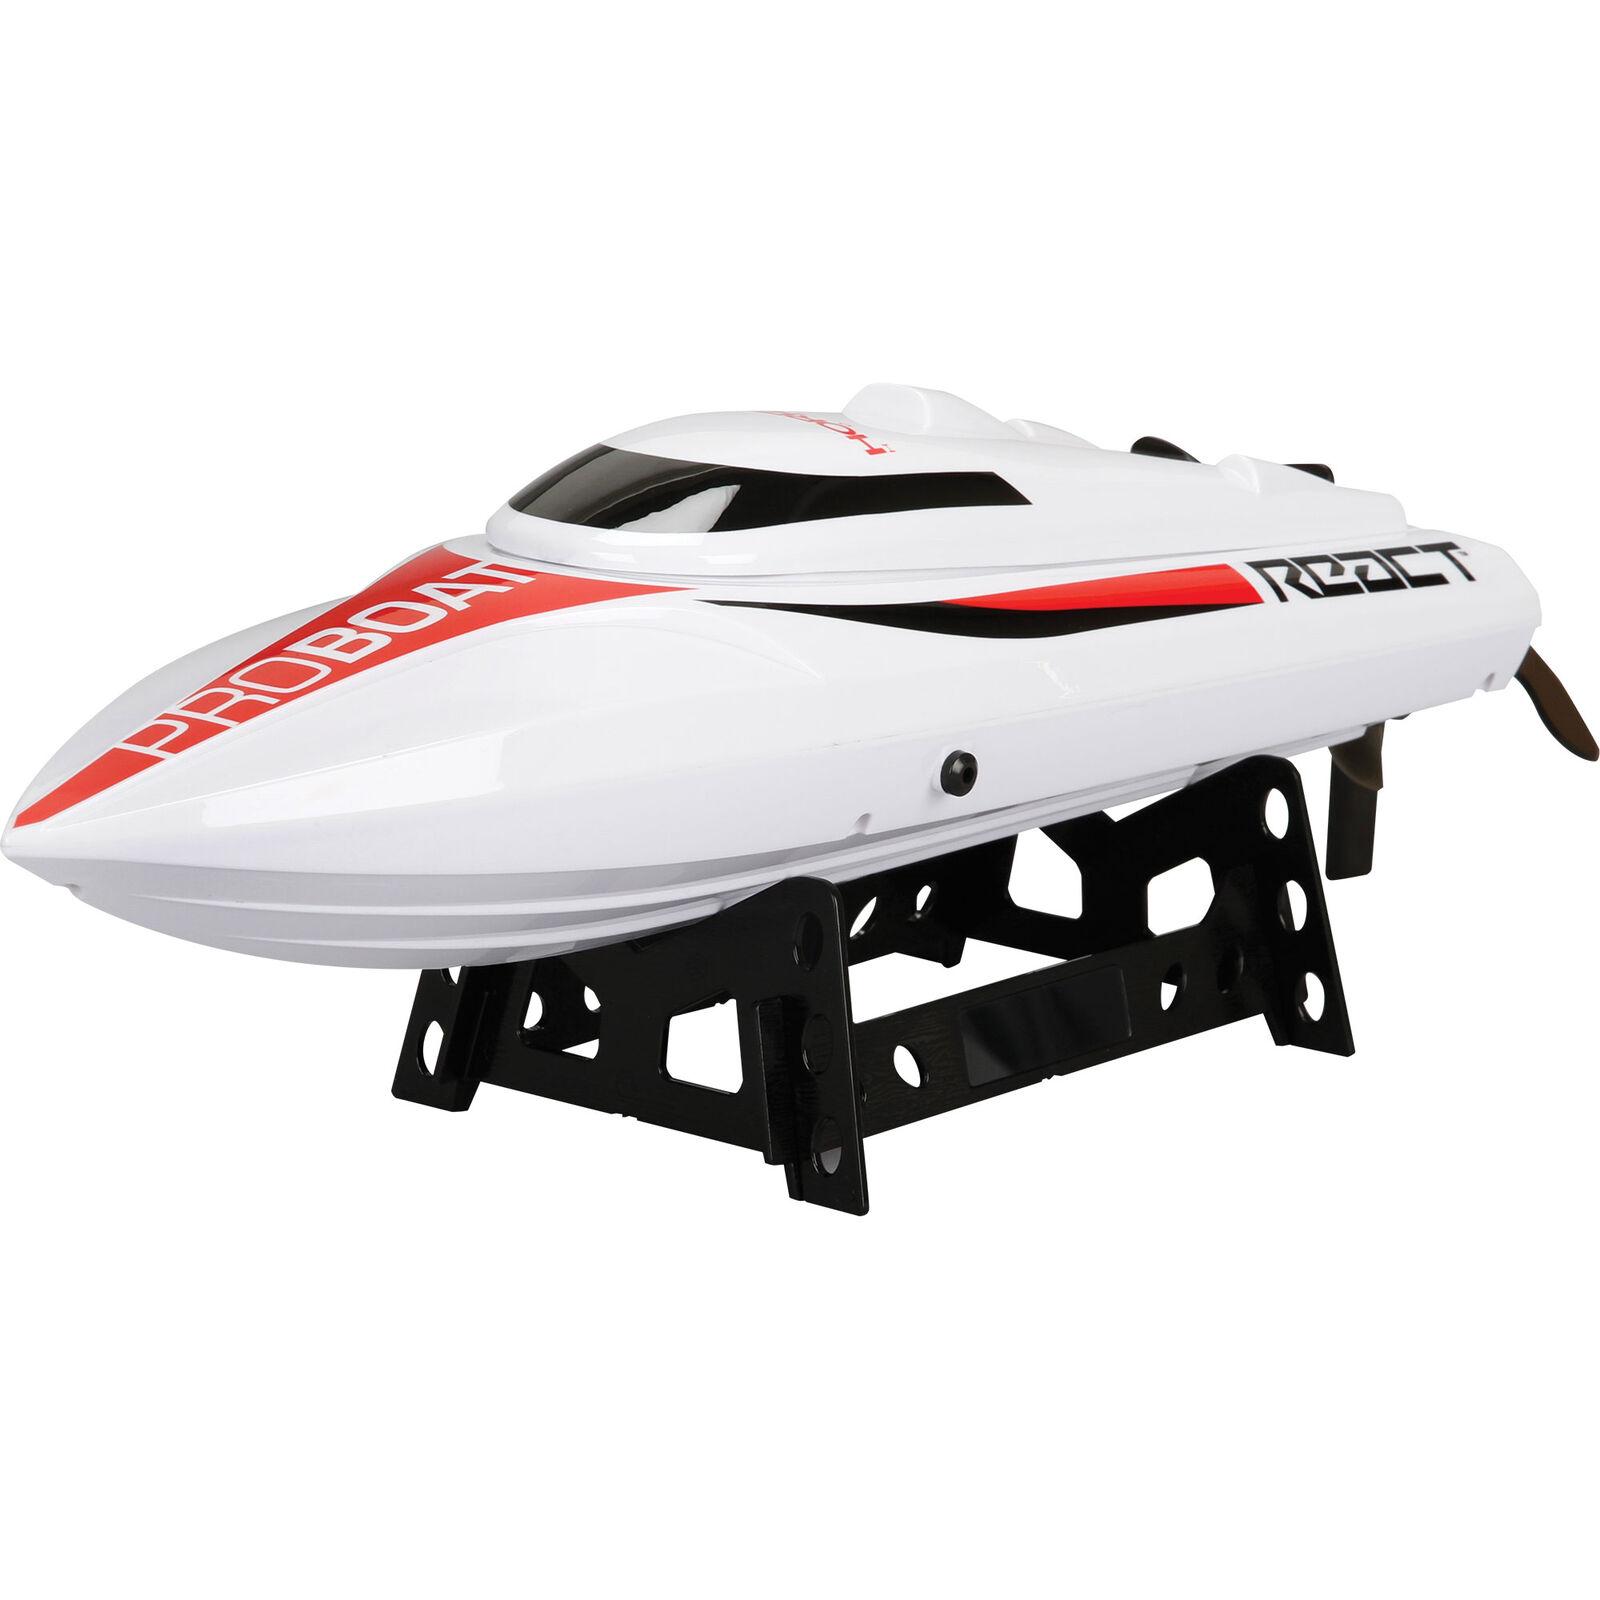 Pro Boat React 17: Impressive Speed and Agility with the Pro Boat React 17